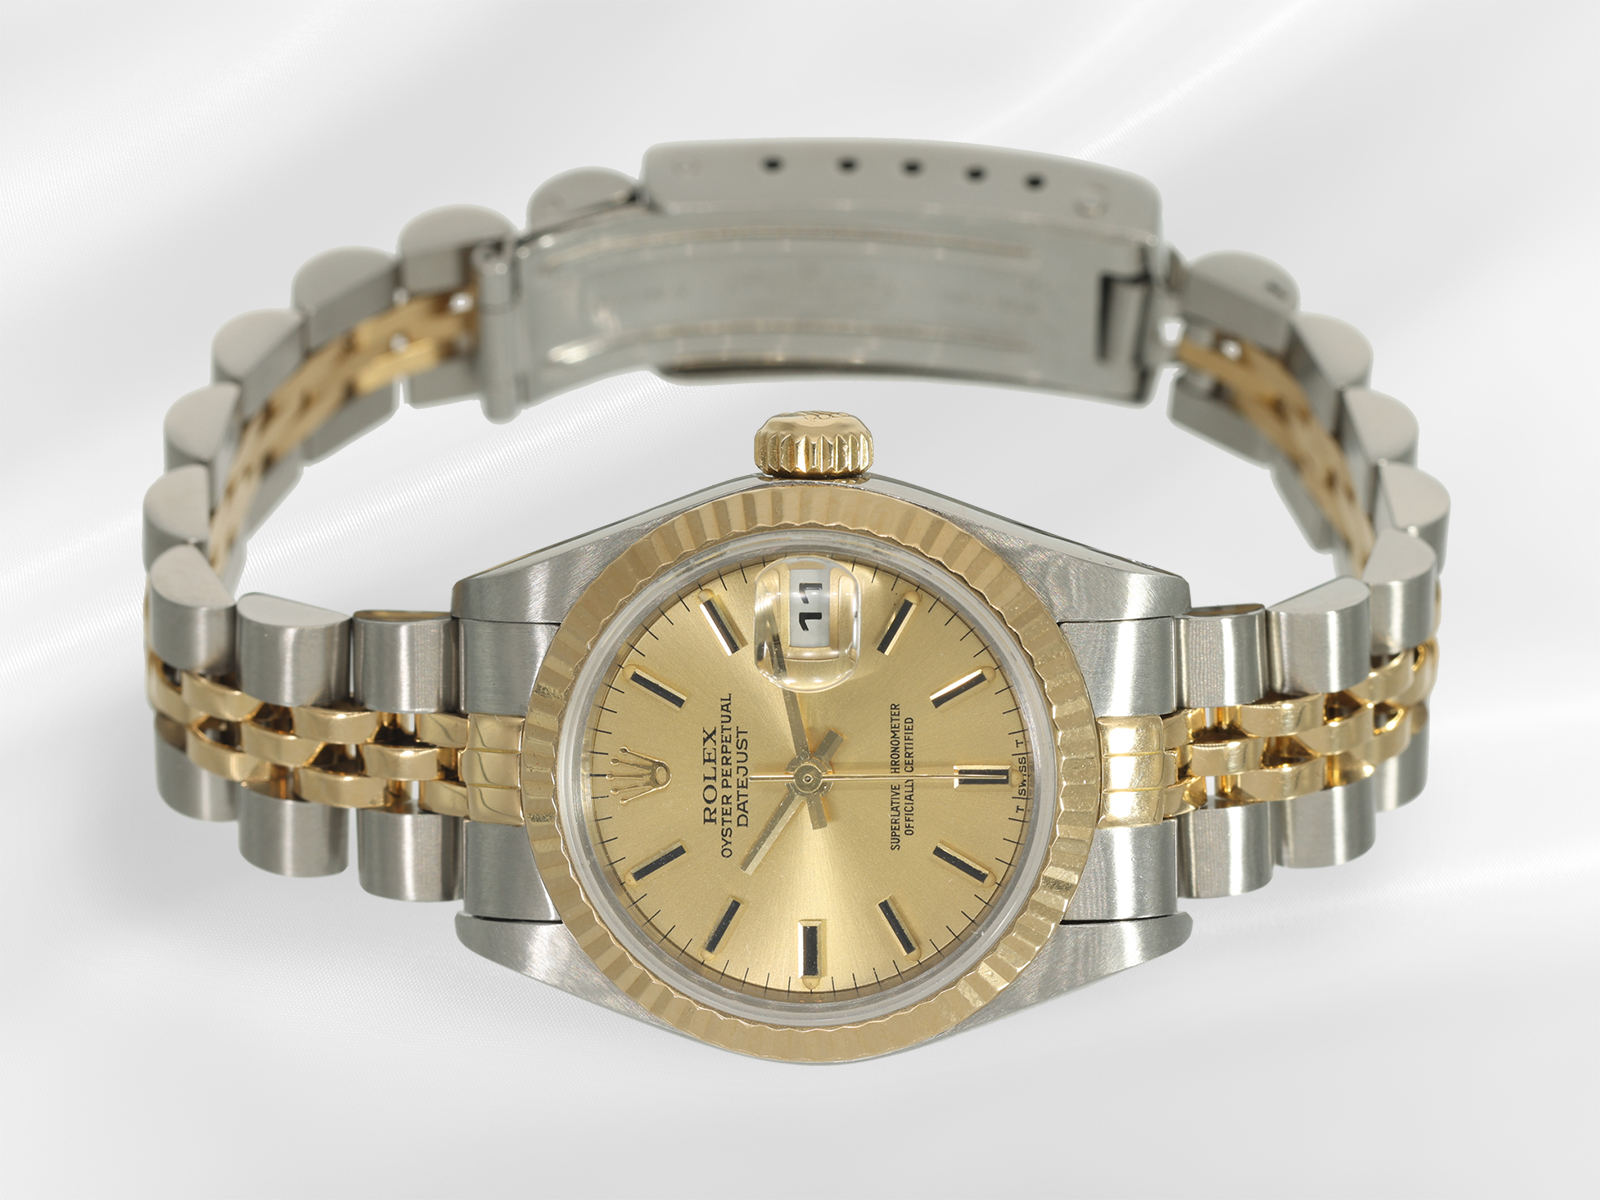 Wristwatch: Rolex Lady-Datejust Ref.69173 in steel/gold, year of manufacture 1987 - Image 2 of 4